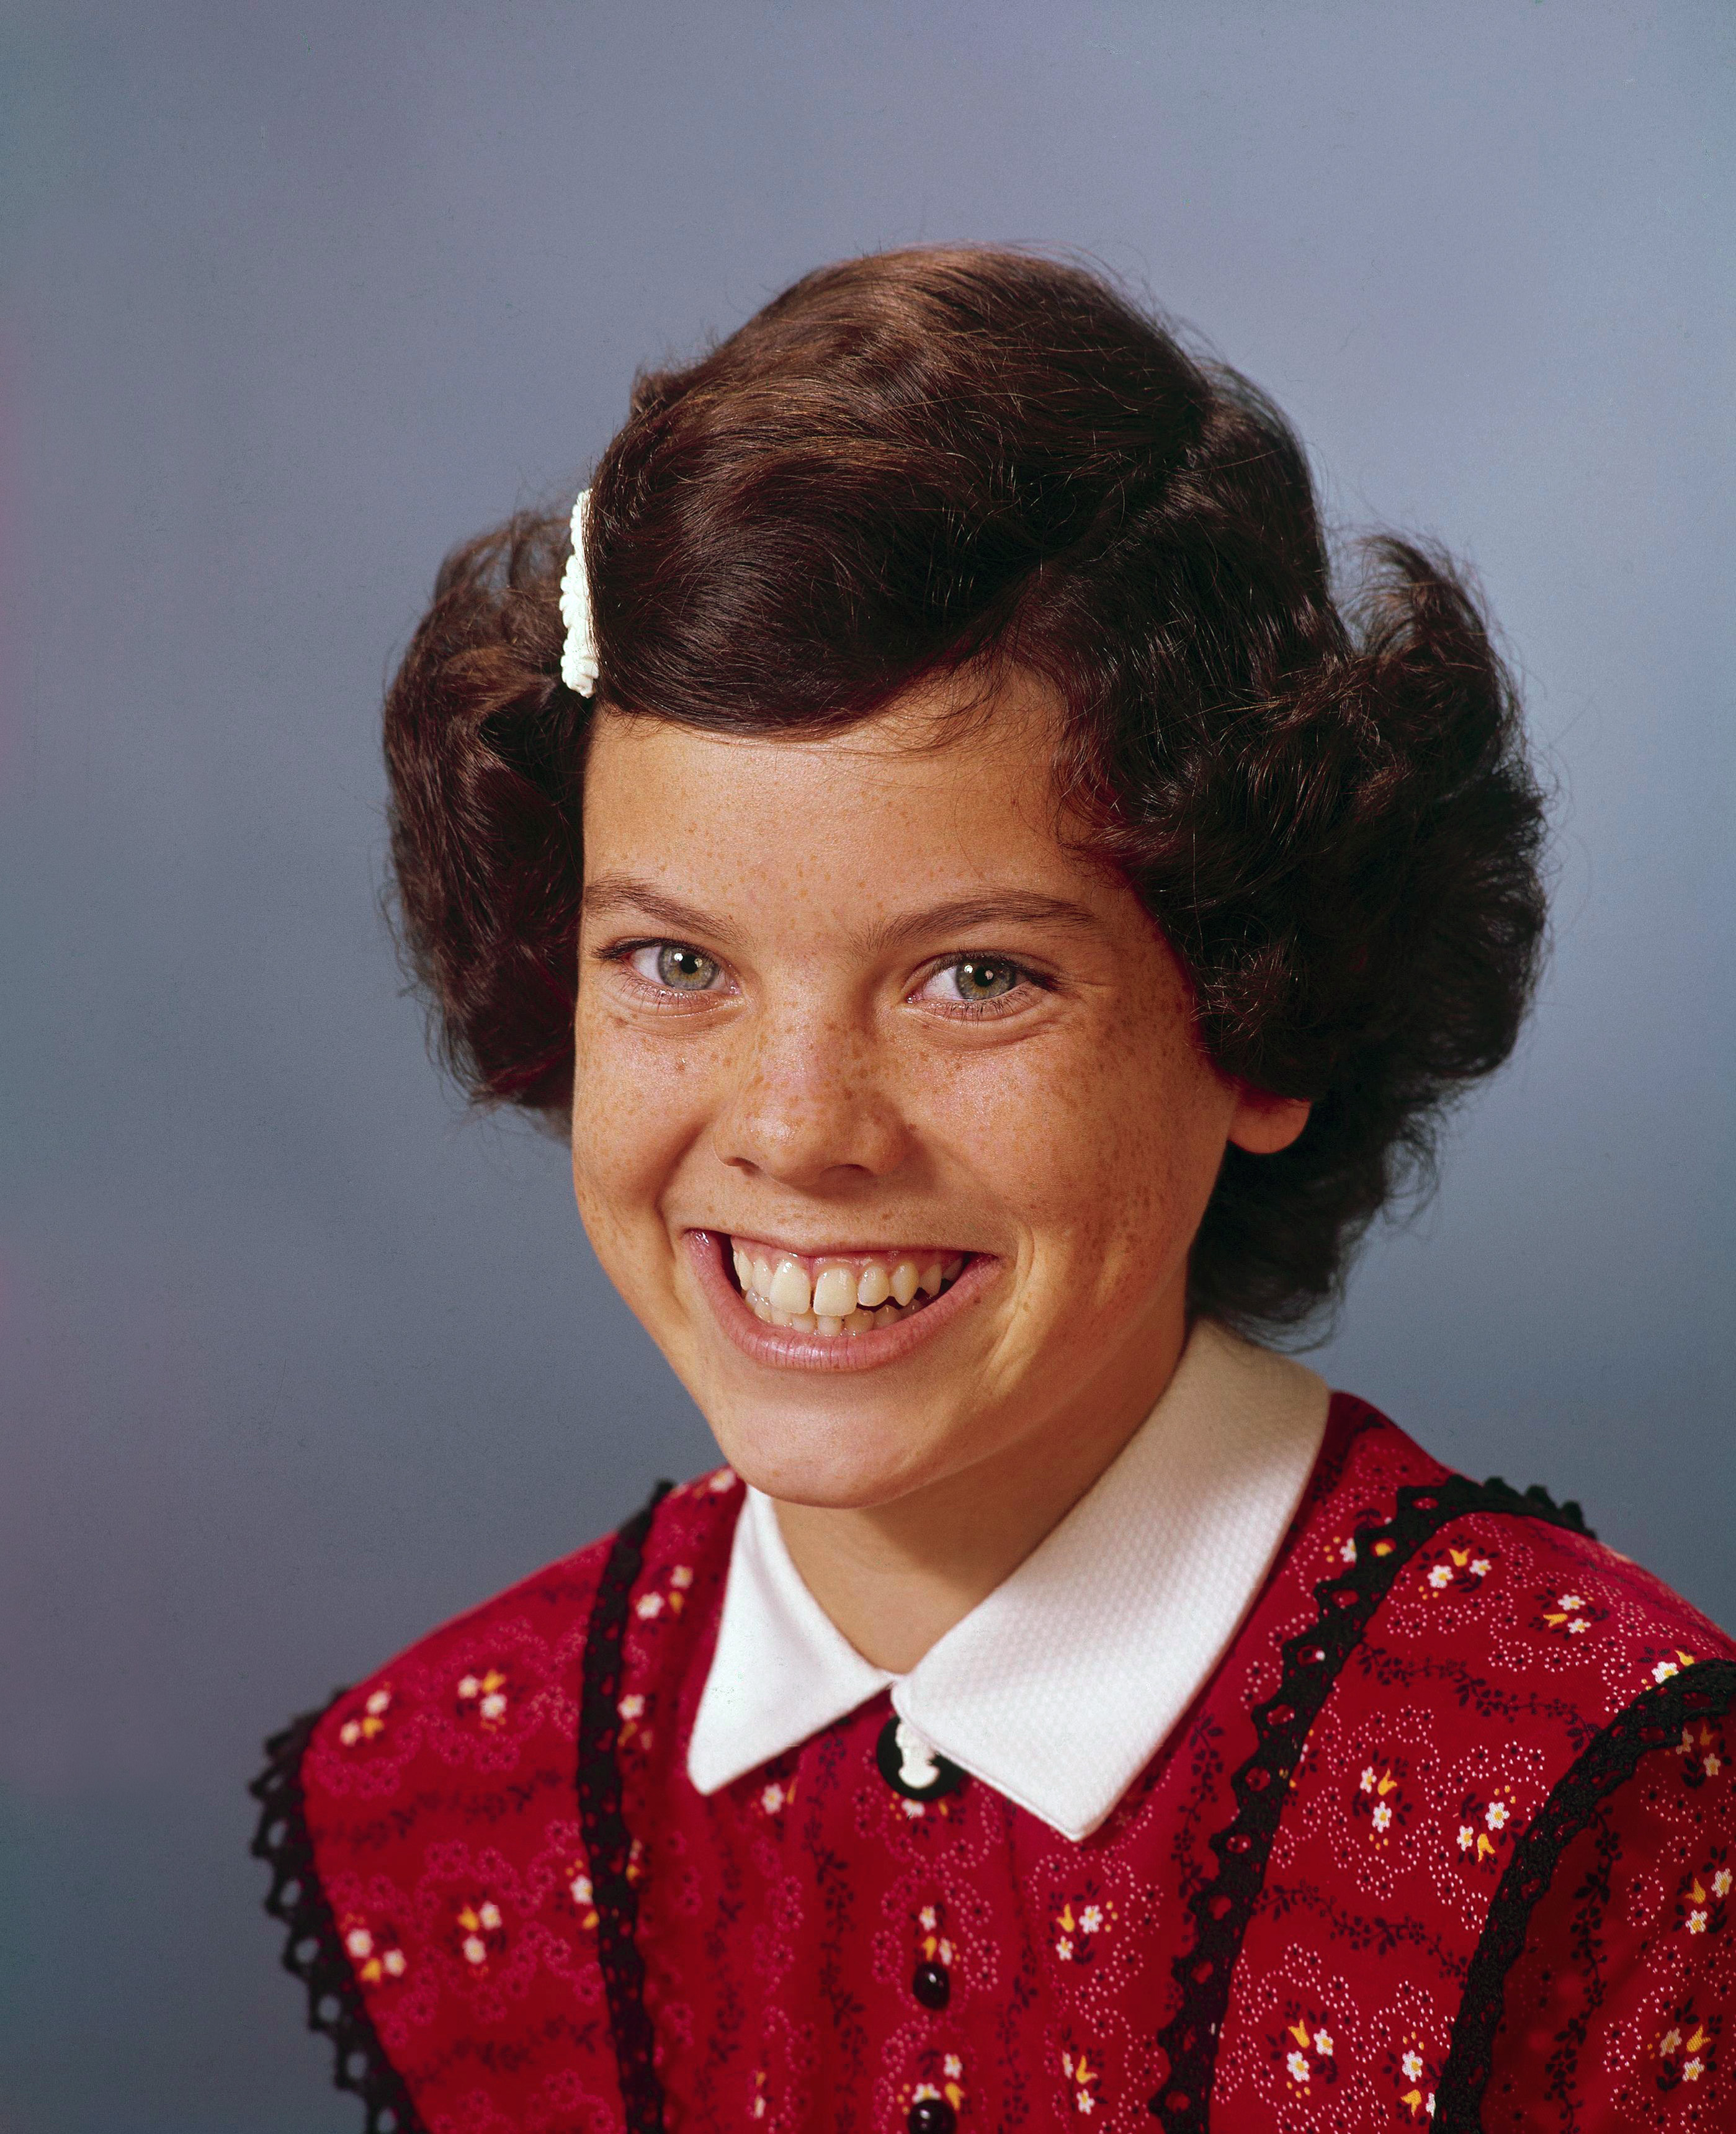 Erin Moran as Joanie Cunningham from "Happy Days" | Source: Getty Images